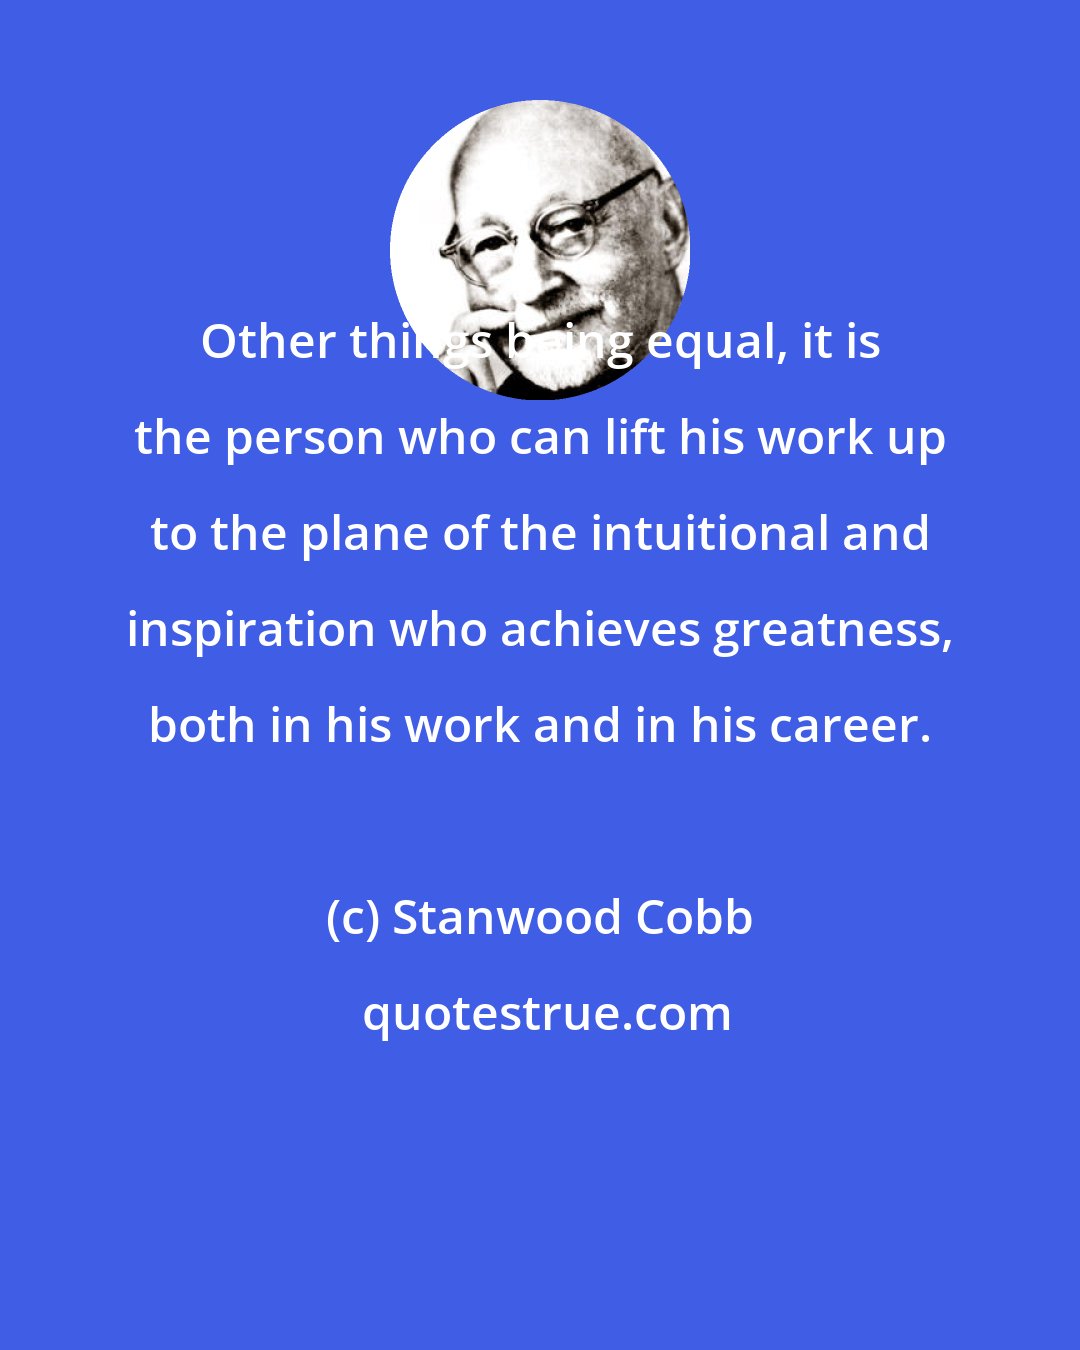 Stanwood Cobb: Other things being equal, it is the person who can lift his work up to the plane of the intuitional and inspiration who achieves greatness, both in his work and in his career.